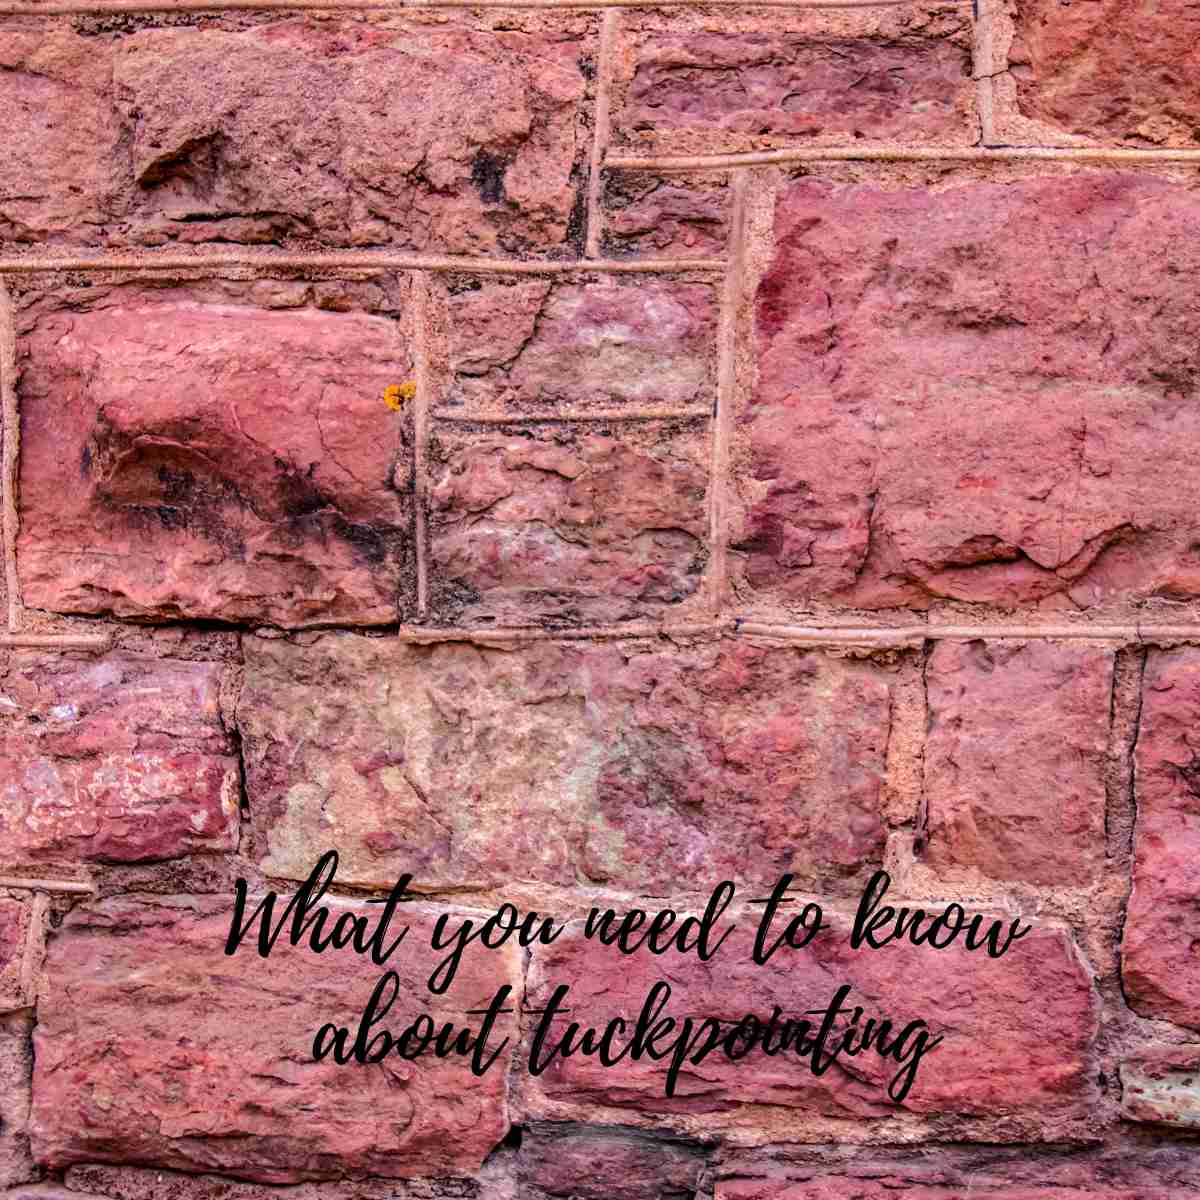 What you need to know about tuckpointing